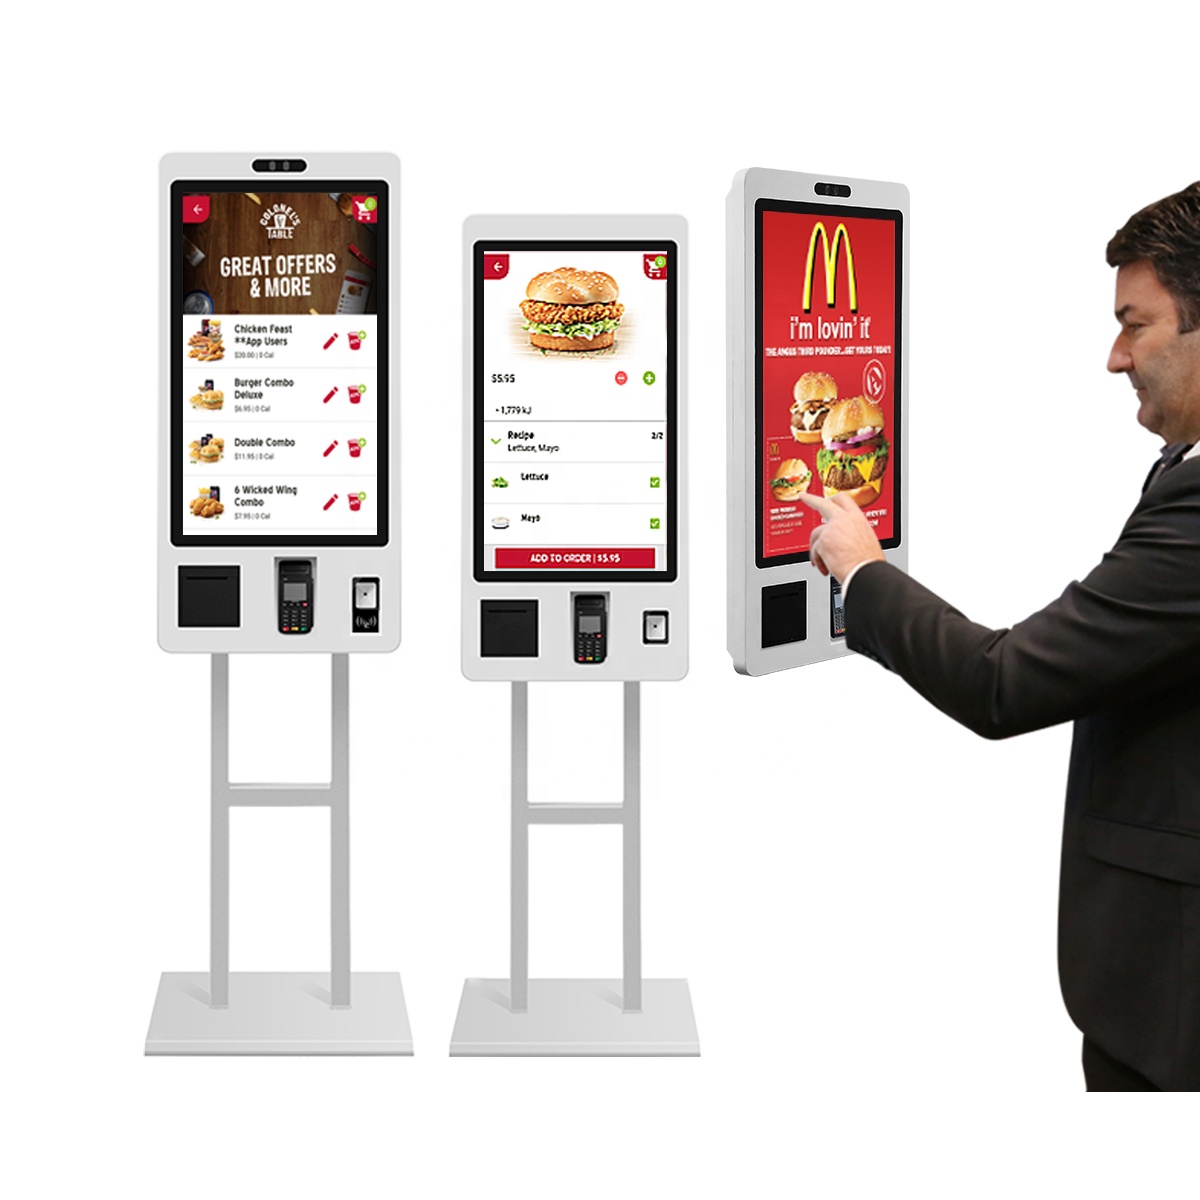 https://www.layson-display.com/32-inch-touchscreen-self-service-payment-ordering-kiosk-for-fast-food-mcdonaldskfcrestaurantsupermarket-product/